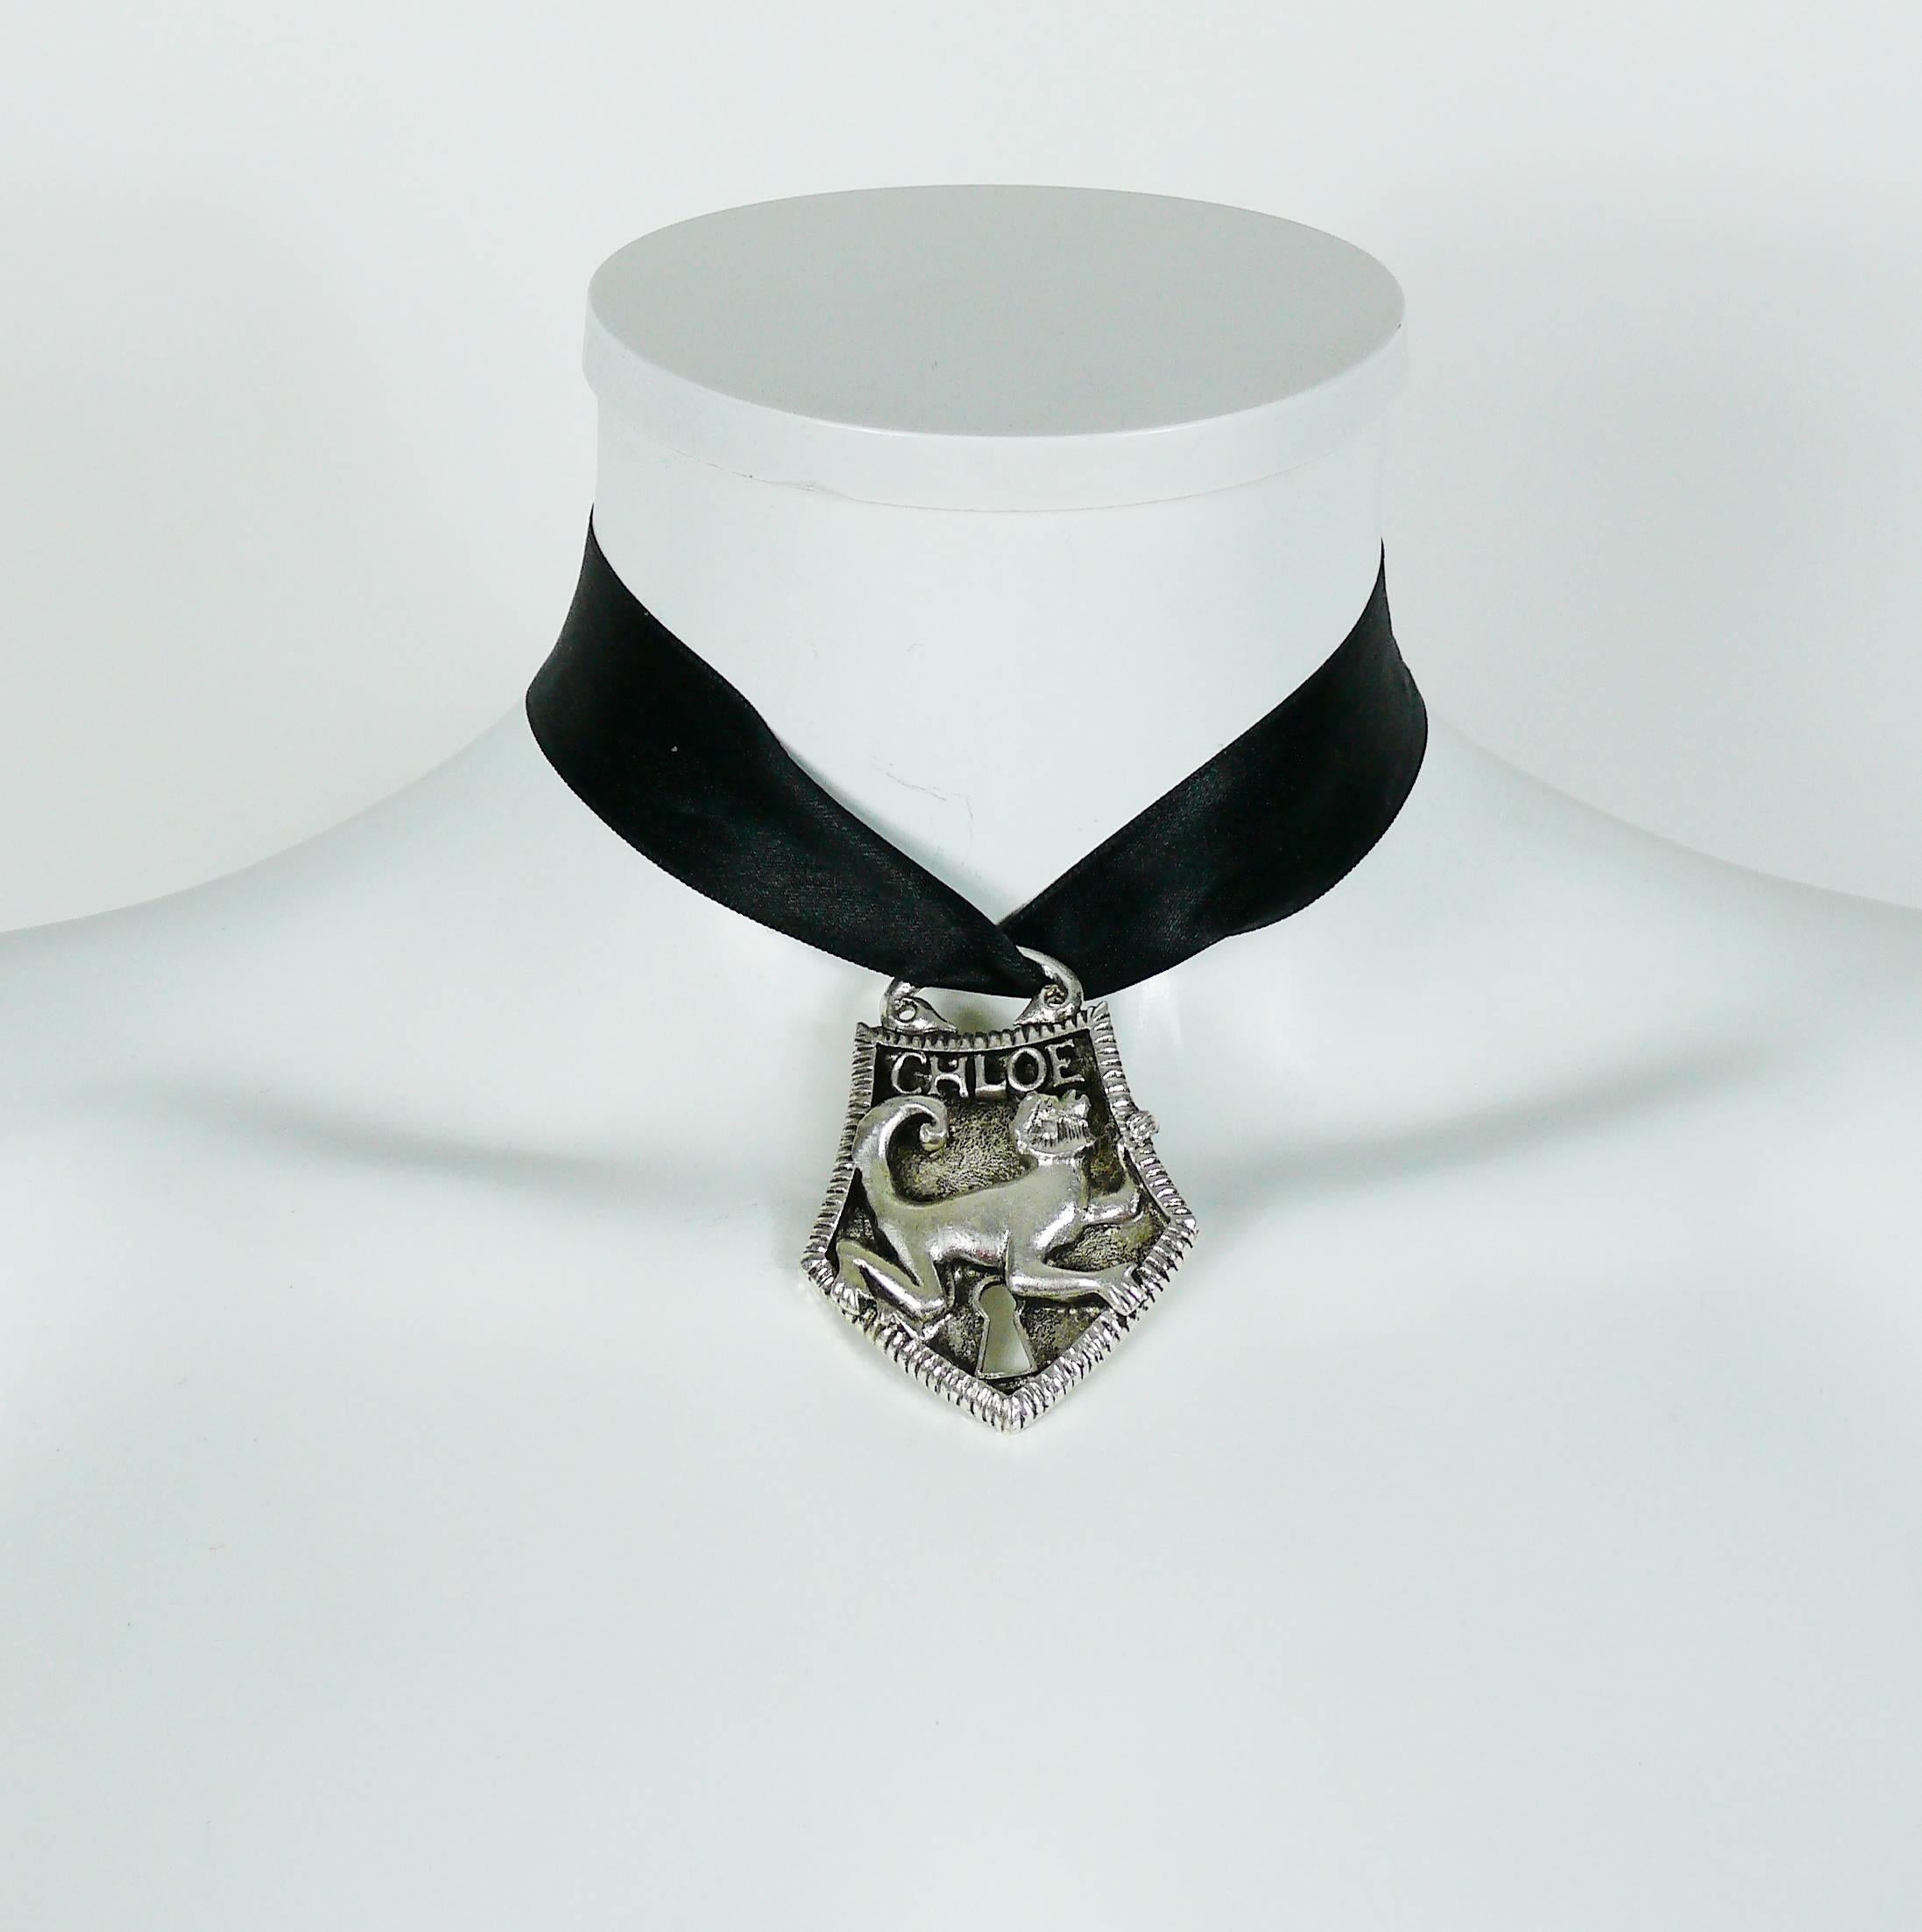 CHLOE antiqued silver tone pendant necklace featuring a monkey lock.

Black satin ribbon.

Embossed CHLOE.

Indicative measurements : ribbon length approx. 57 cm (22.44 inches) / pendant approx. 5.9 cm (2.32 inches) x 4.5 cm (1.77 inches).

JEWELRY